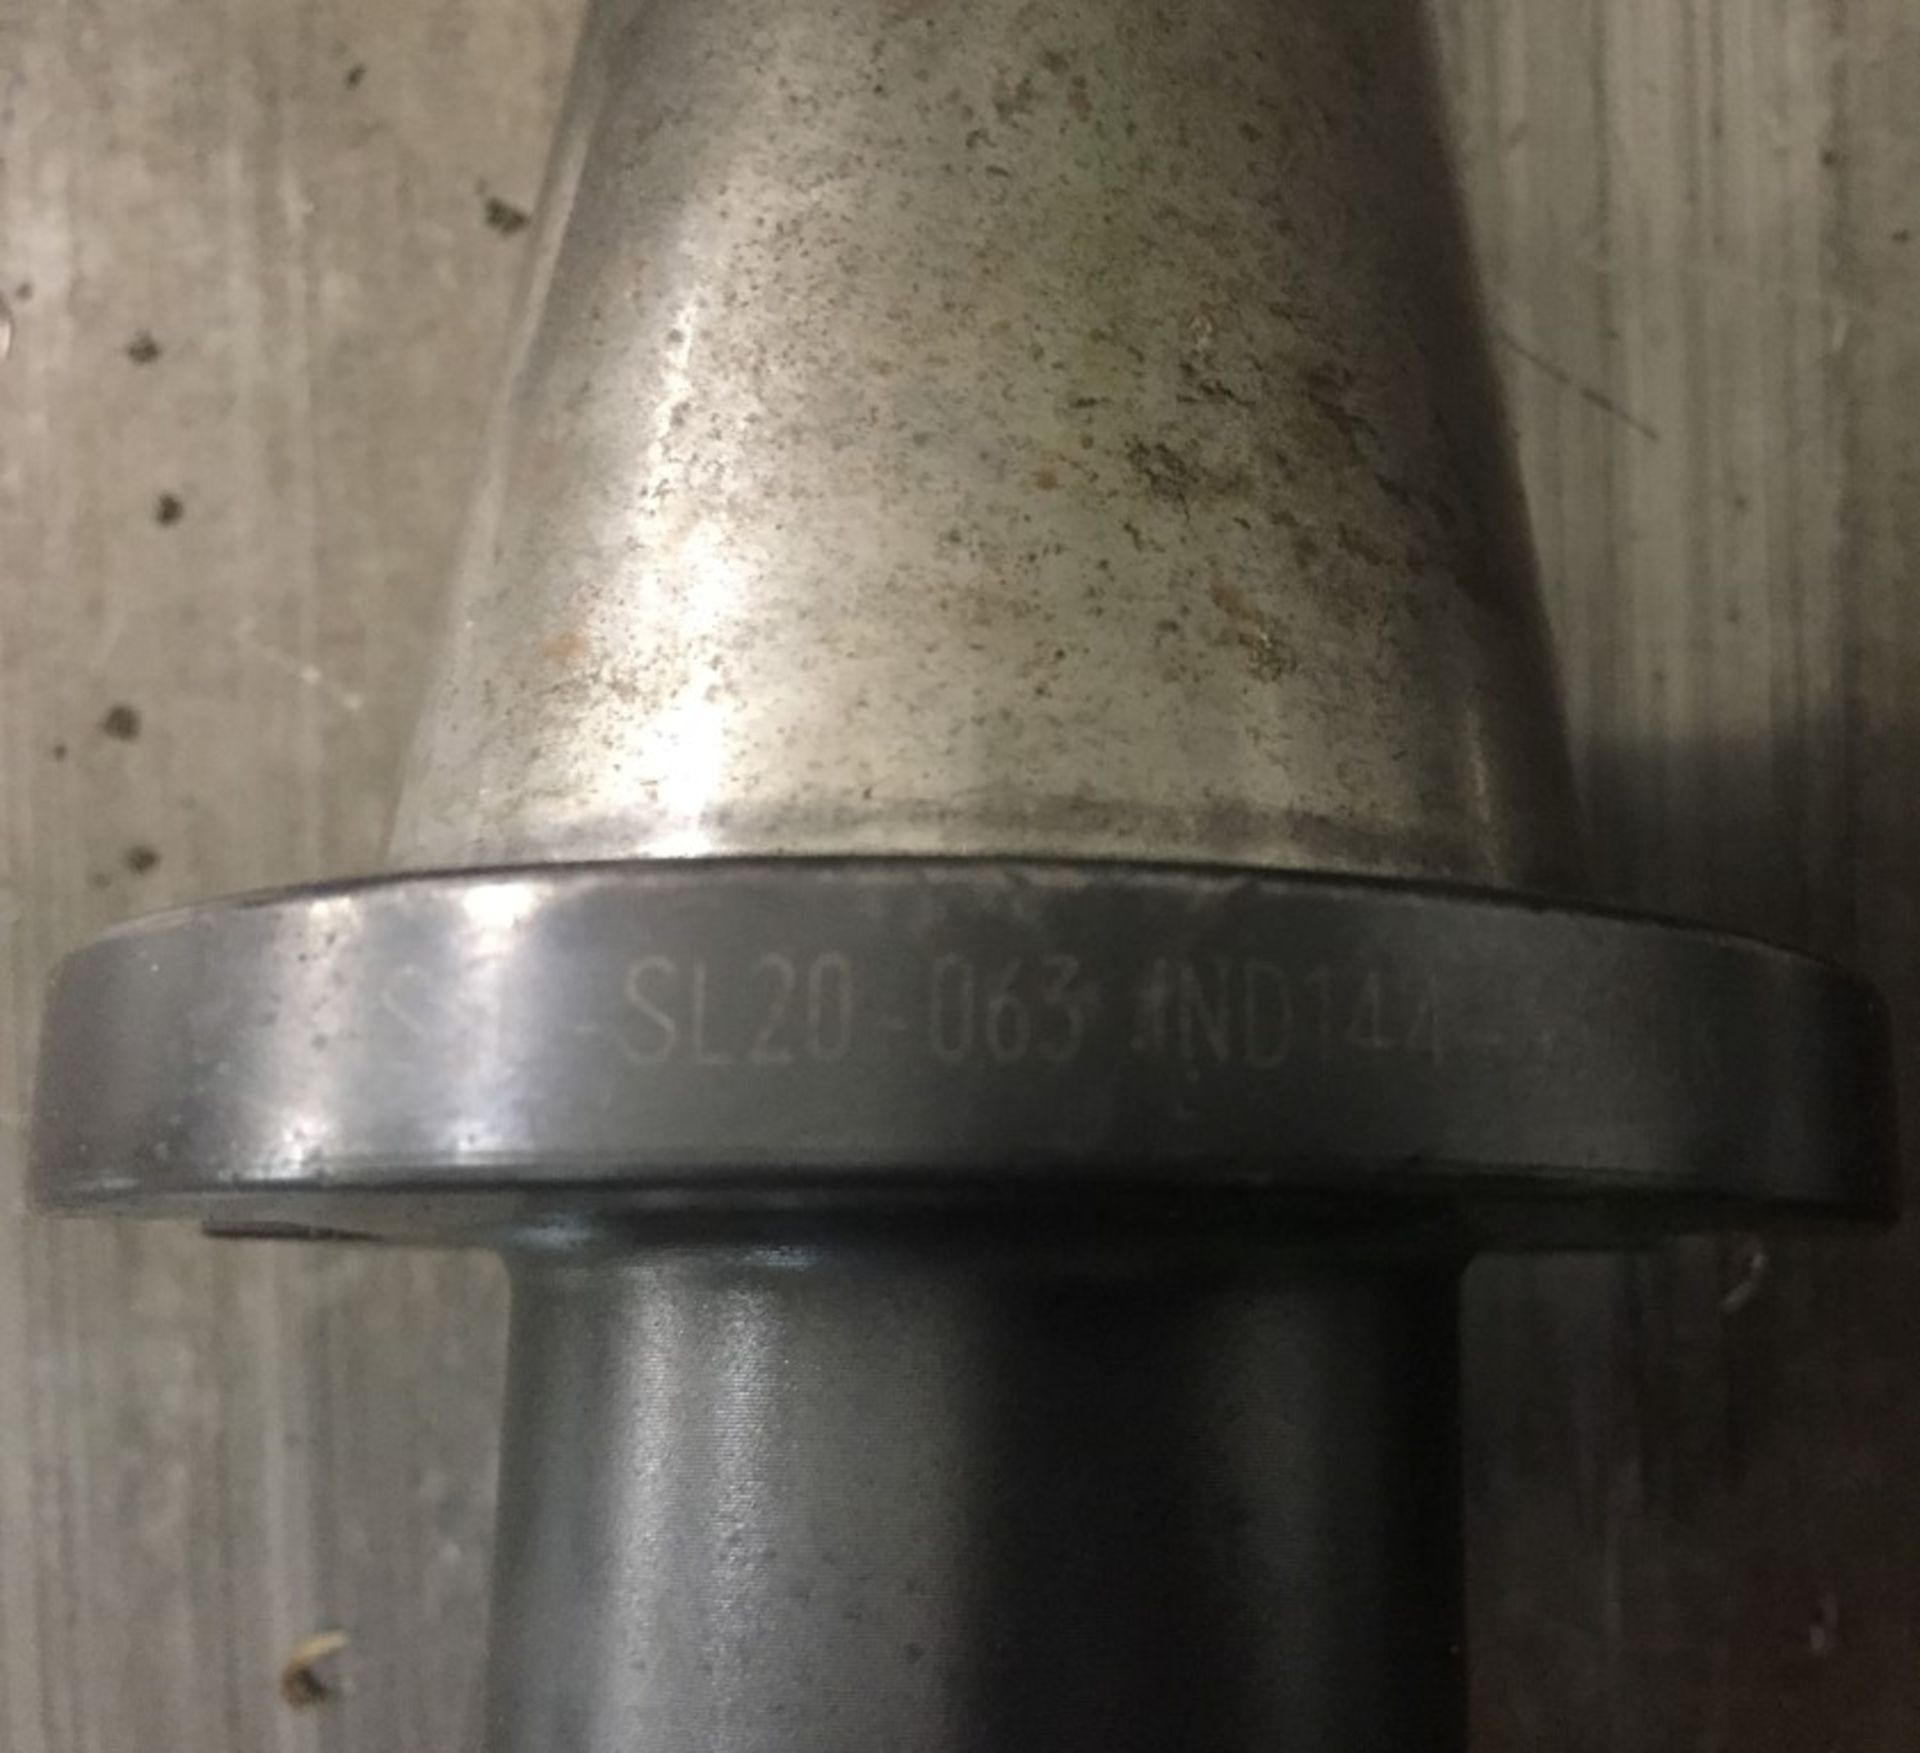 1 x Indexa SeikI CNC / VMC Mill Chuck with IS50-SL20-063 End Mill/Sidelock Adaptor - Image 8 of 12